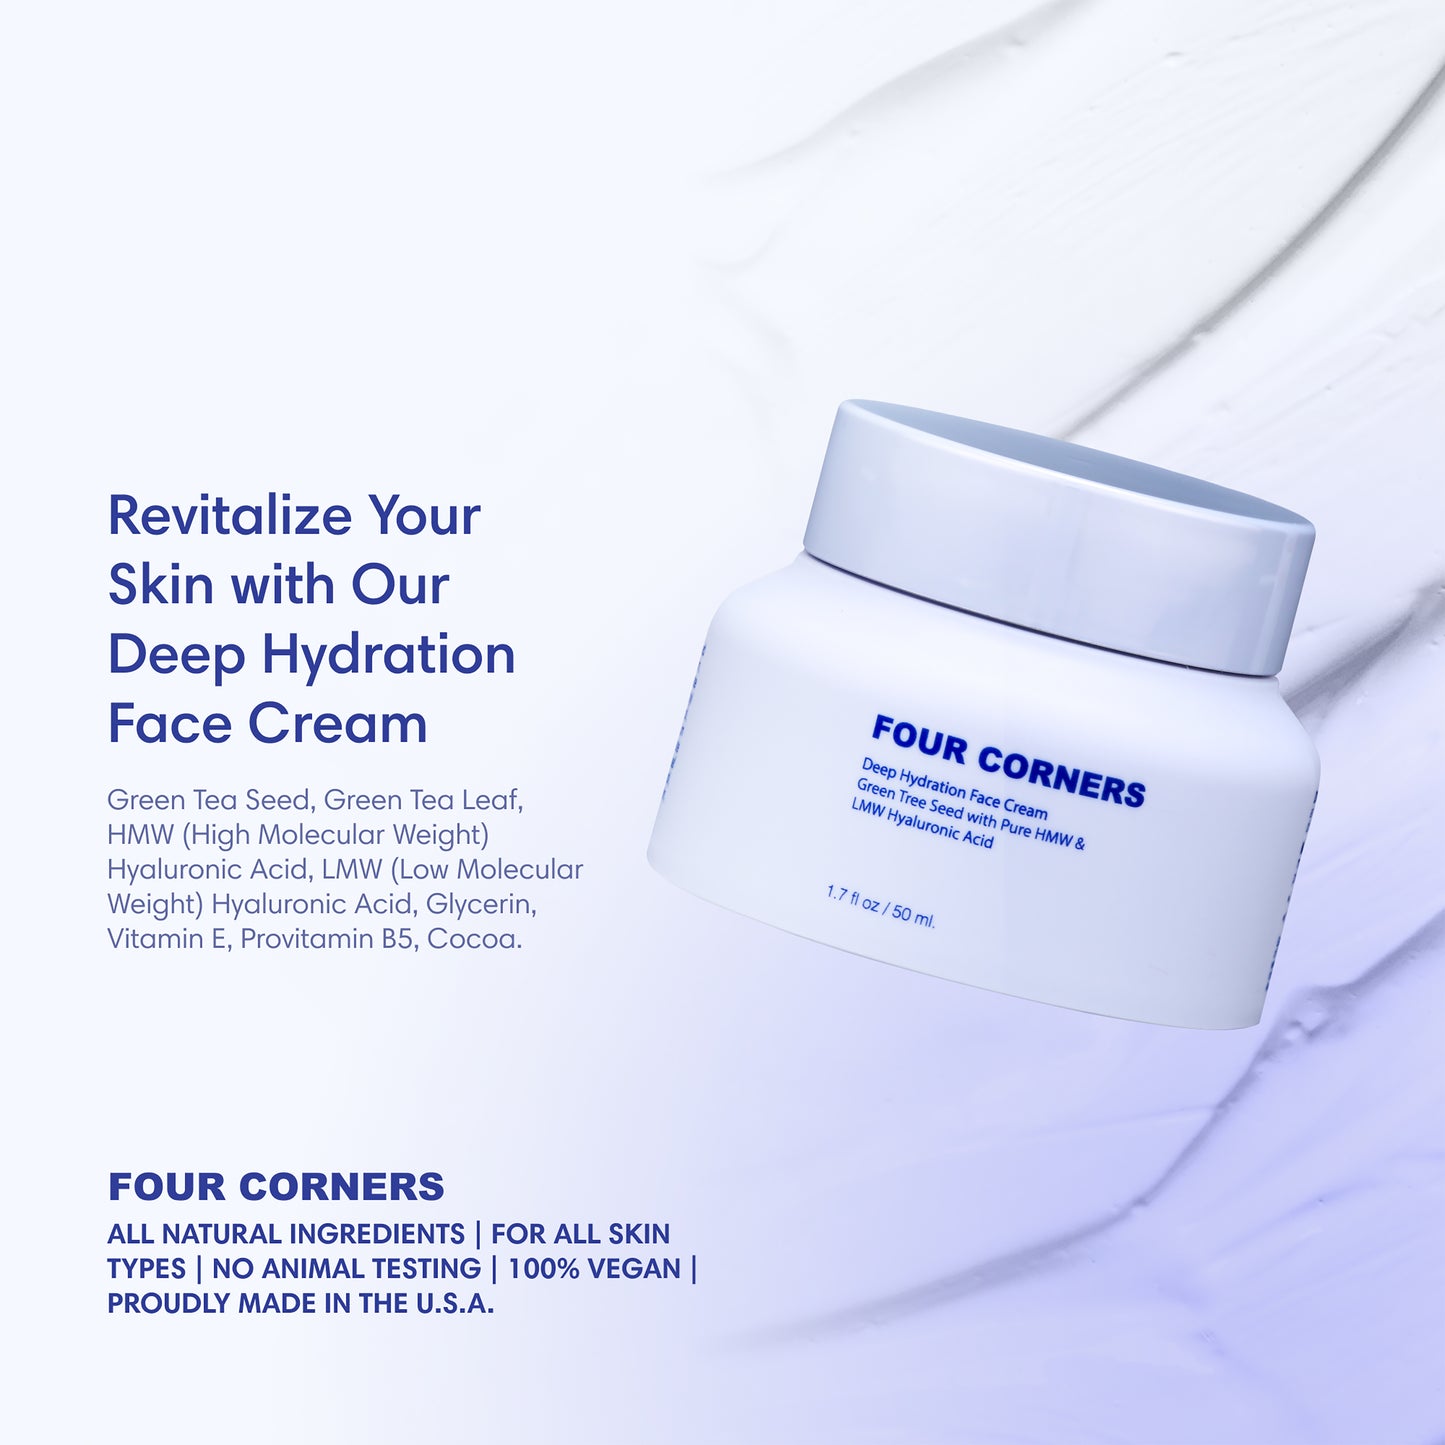 Deep Hydration Face Cream Revitalize Your Skin With Our Deep Hydration Face Cream